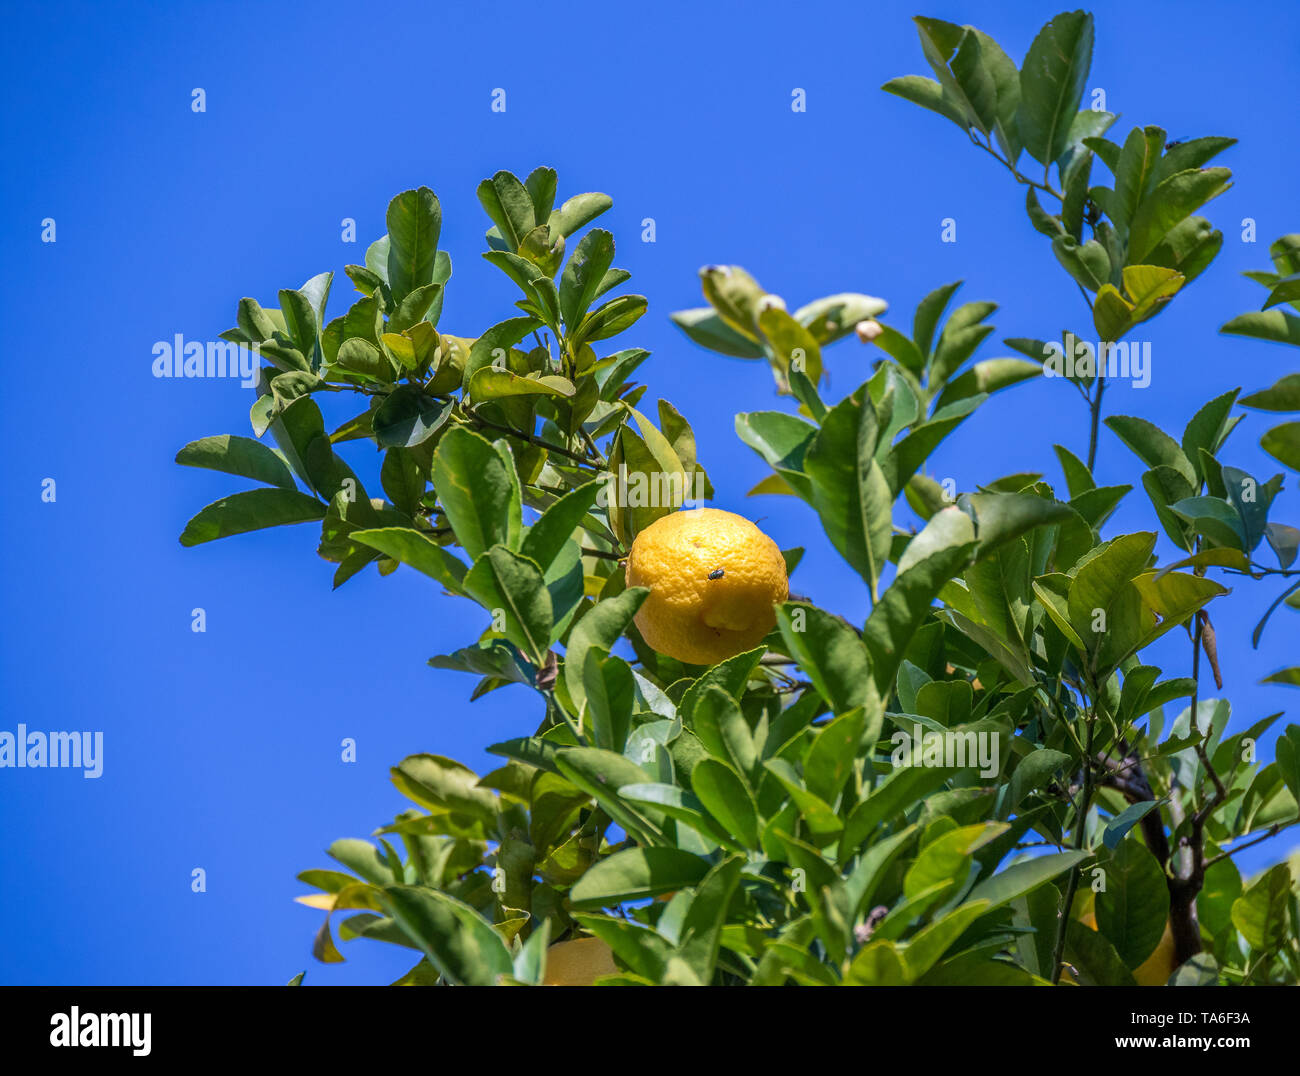 A lemon with a fly sunning itself on it hangs in a tree with green leaves isolated against a crisp blue sky image with copy space Stock Photo